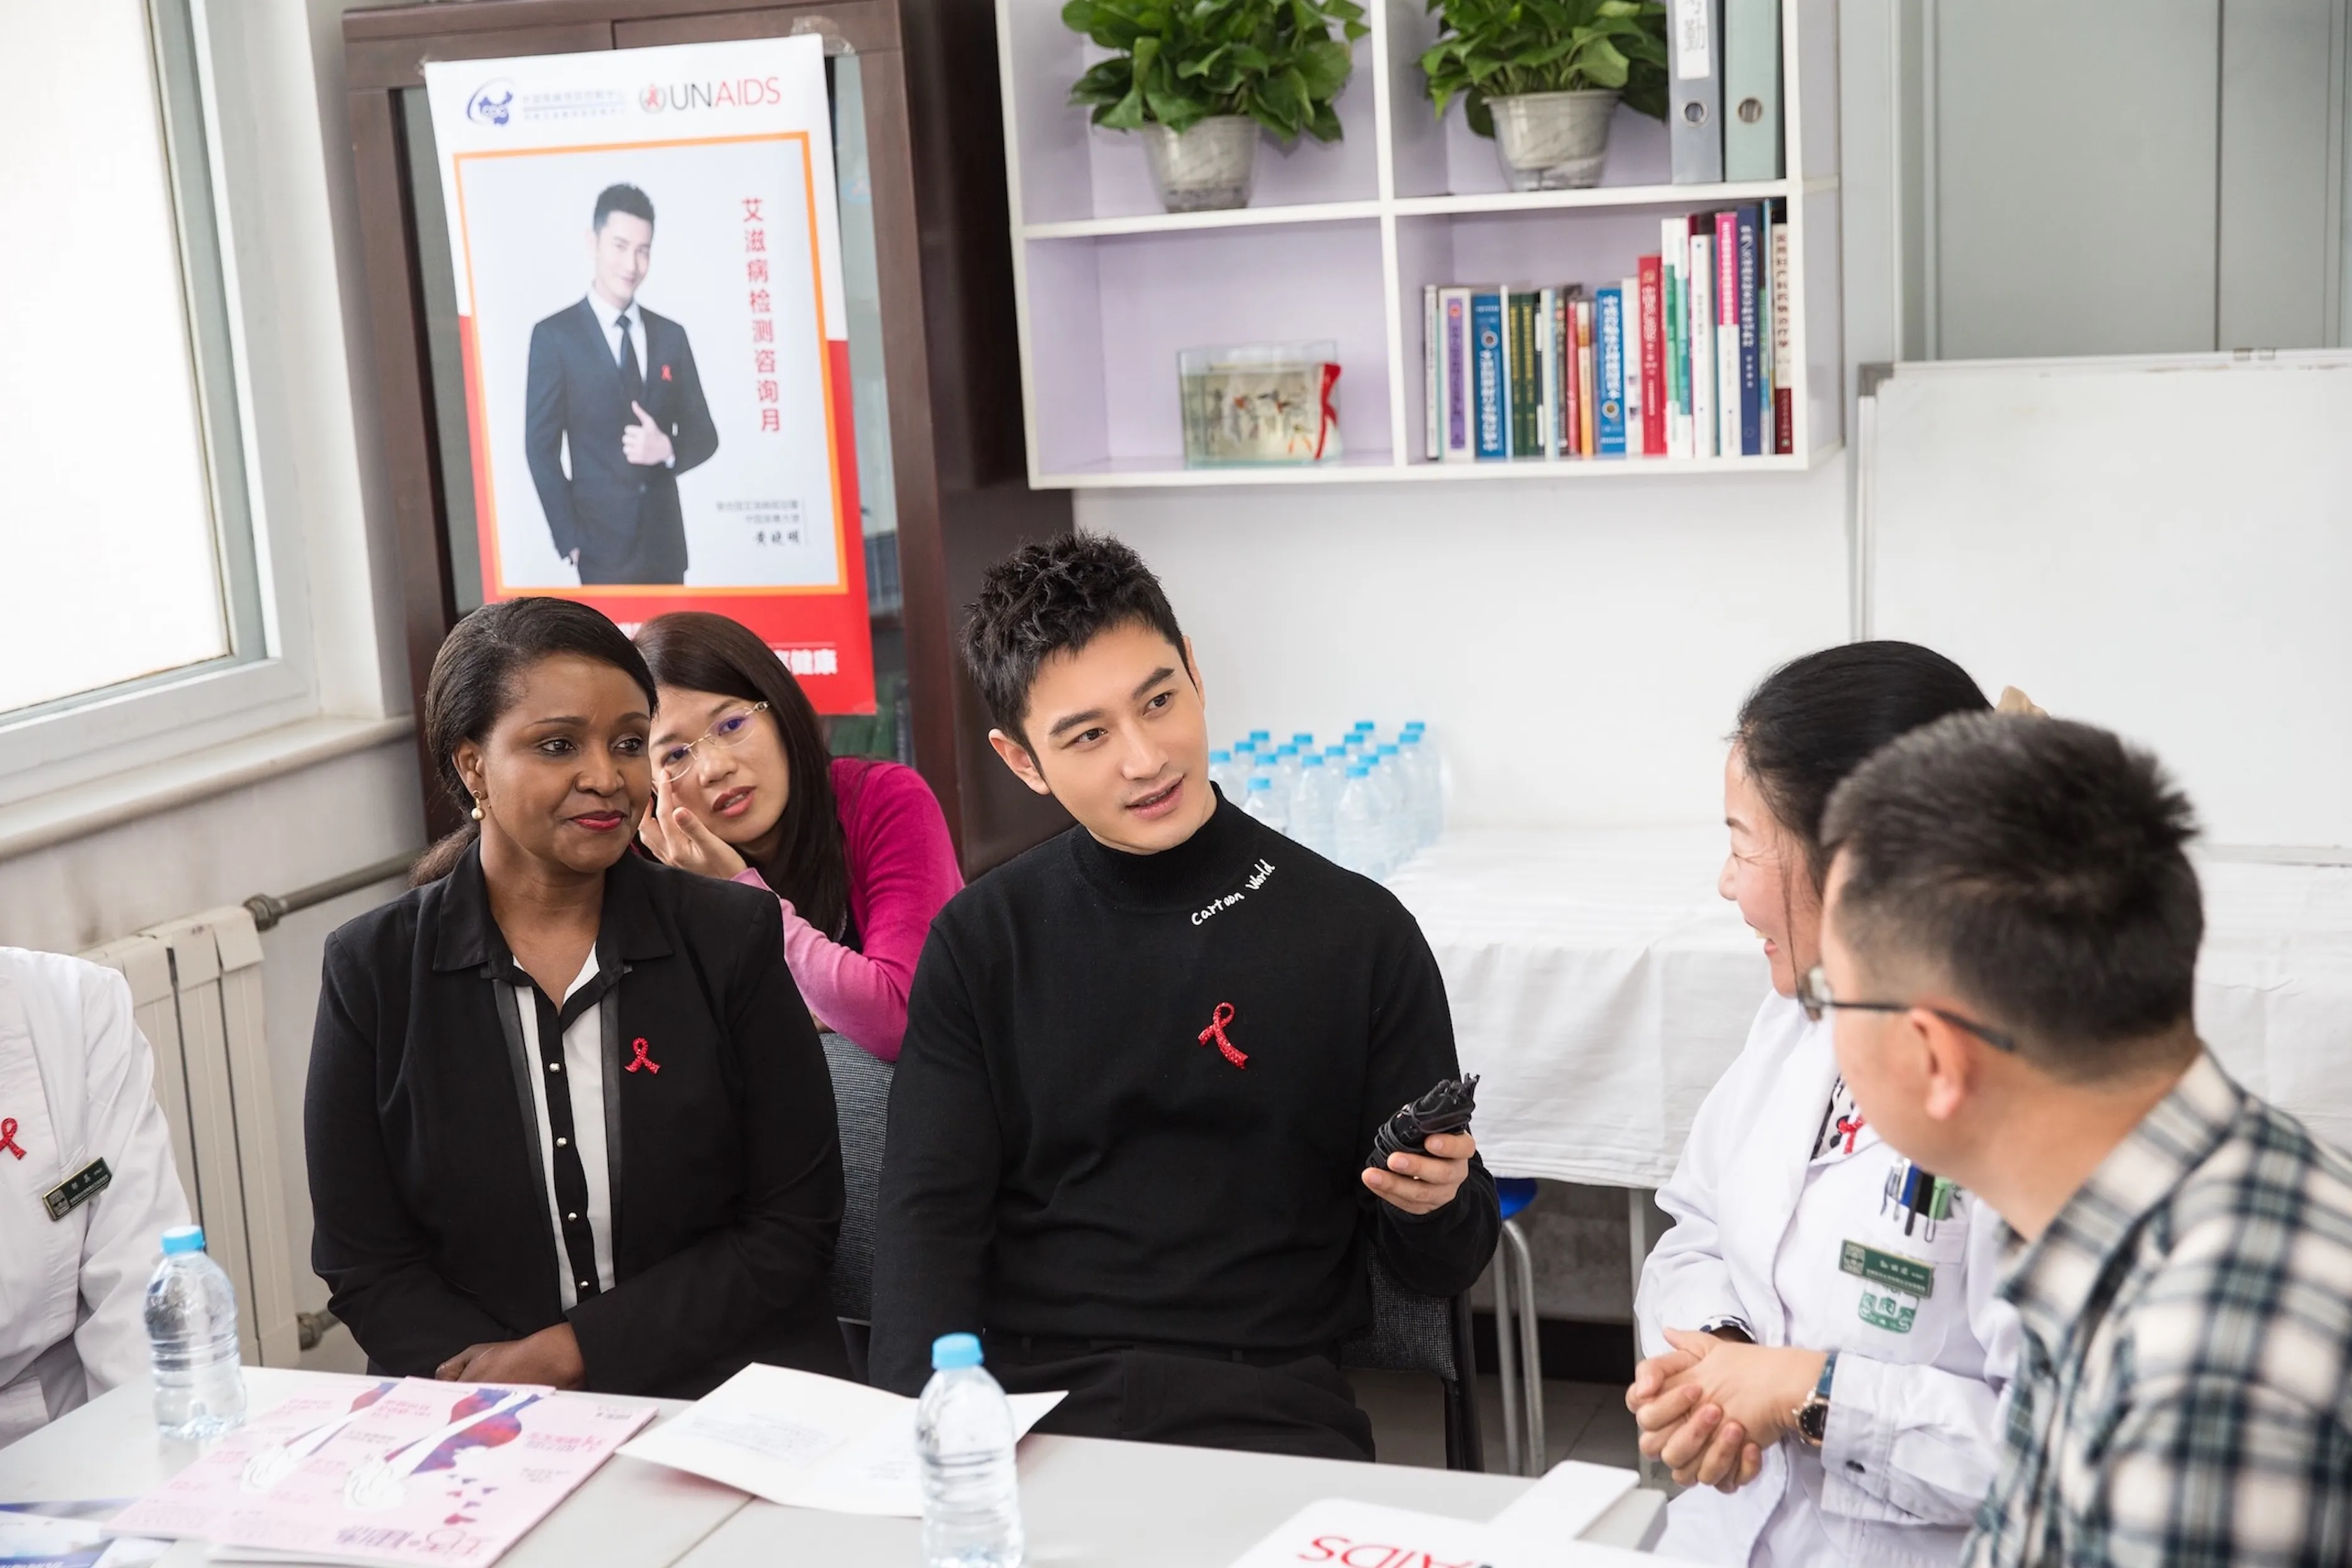 Xiaoming Huang, a unaids goodwill ambassador, talked with laboratory staff and volunteers